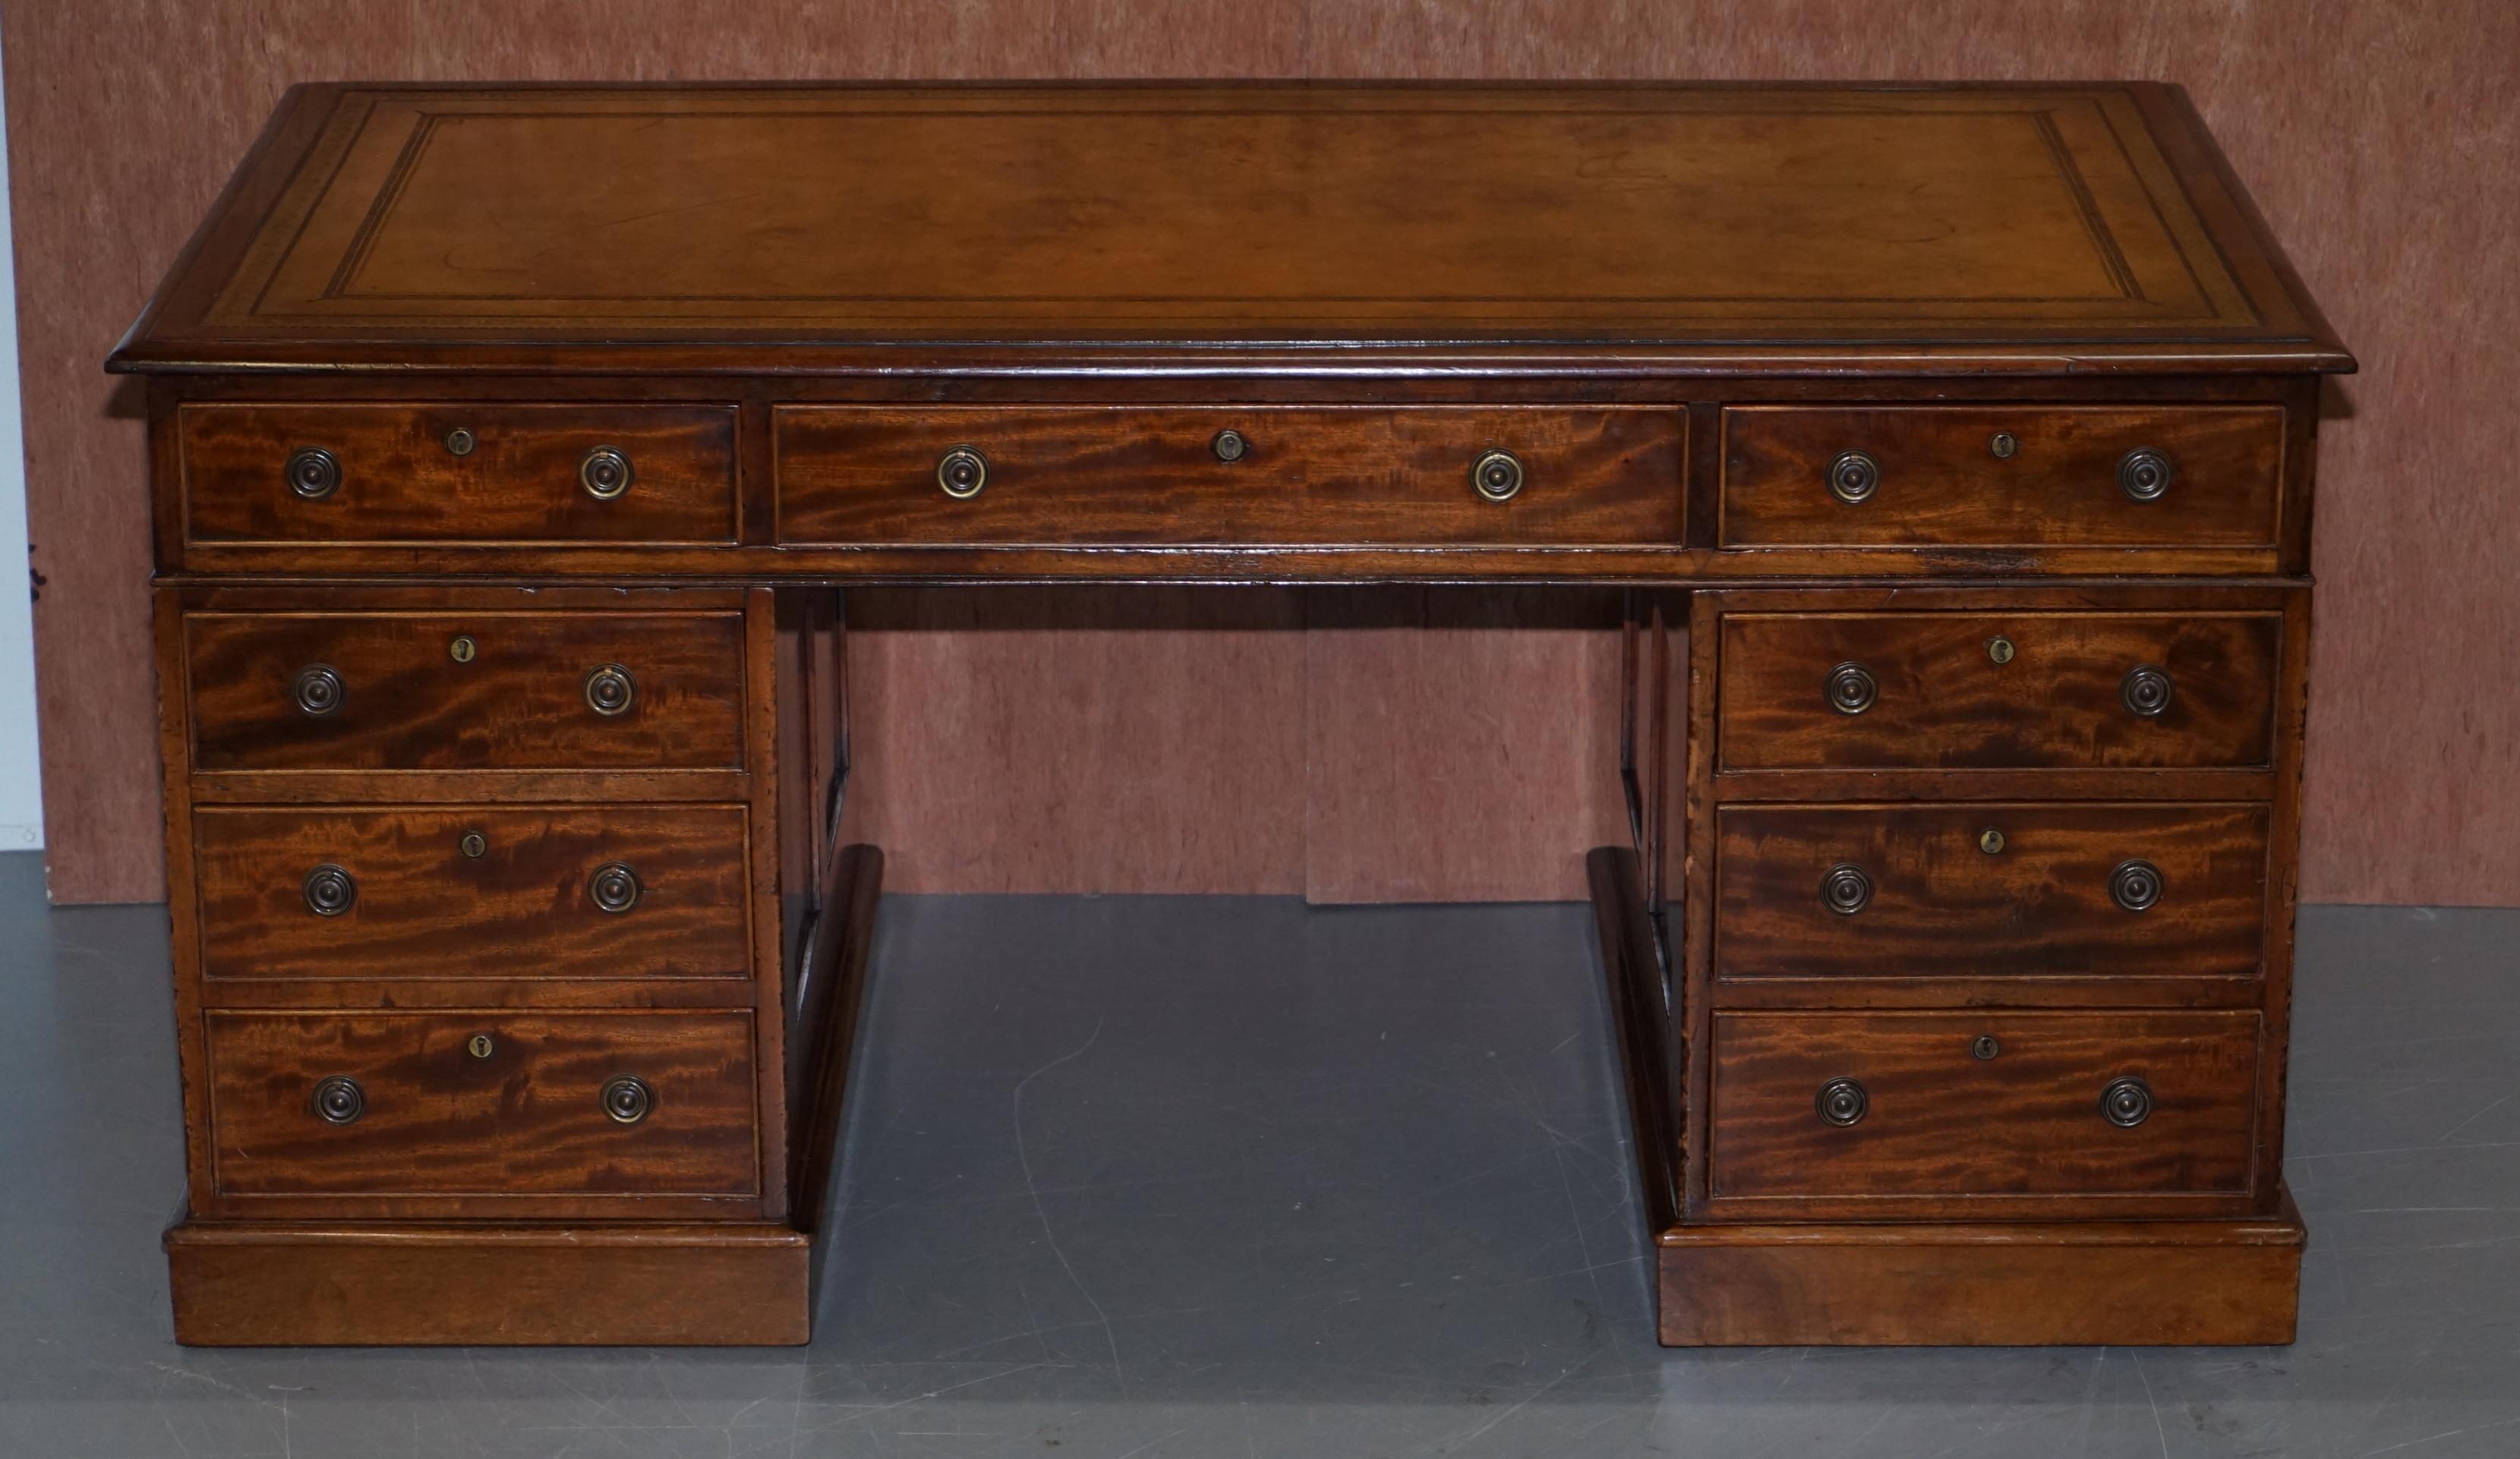 We are delighted to offer for sale this lovely restored circa 1810-1820 Regency mahogany with restored hand dyed brown leather top twin pedestal partner desk

A very well made piece, the timber is Cuban mahogany which has a glorious patina to it